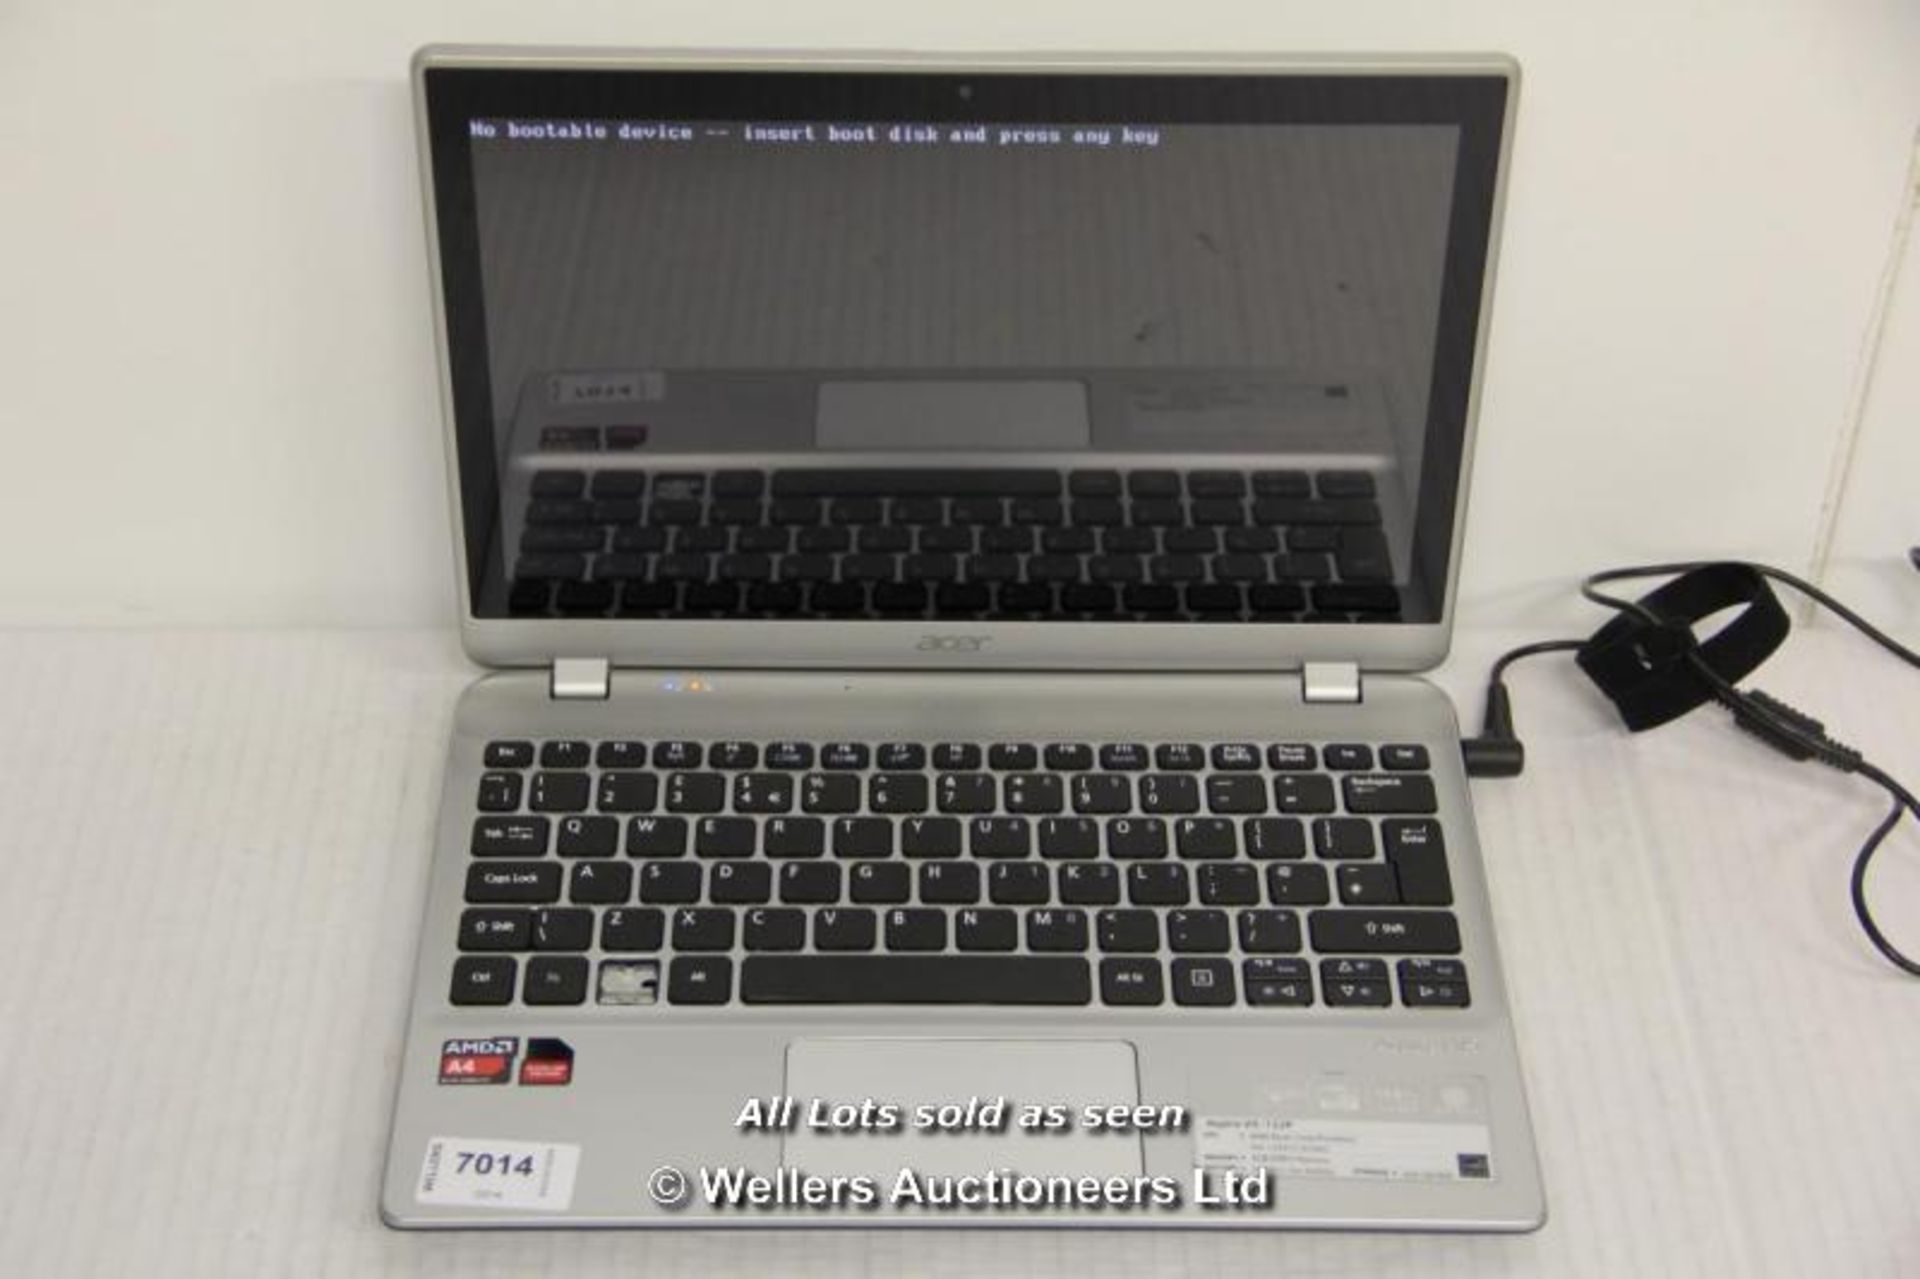 *"ACER ASPIRE V5-122P 11.6" TOUCH SCREEN LAPTOP / AMD A4-1250 1.0GHZ / RAM 4GB / 500GB HDD / WITHOUT